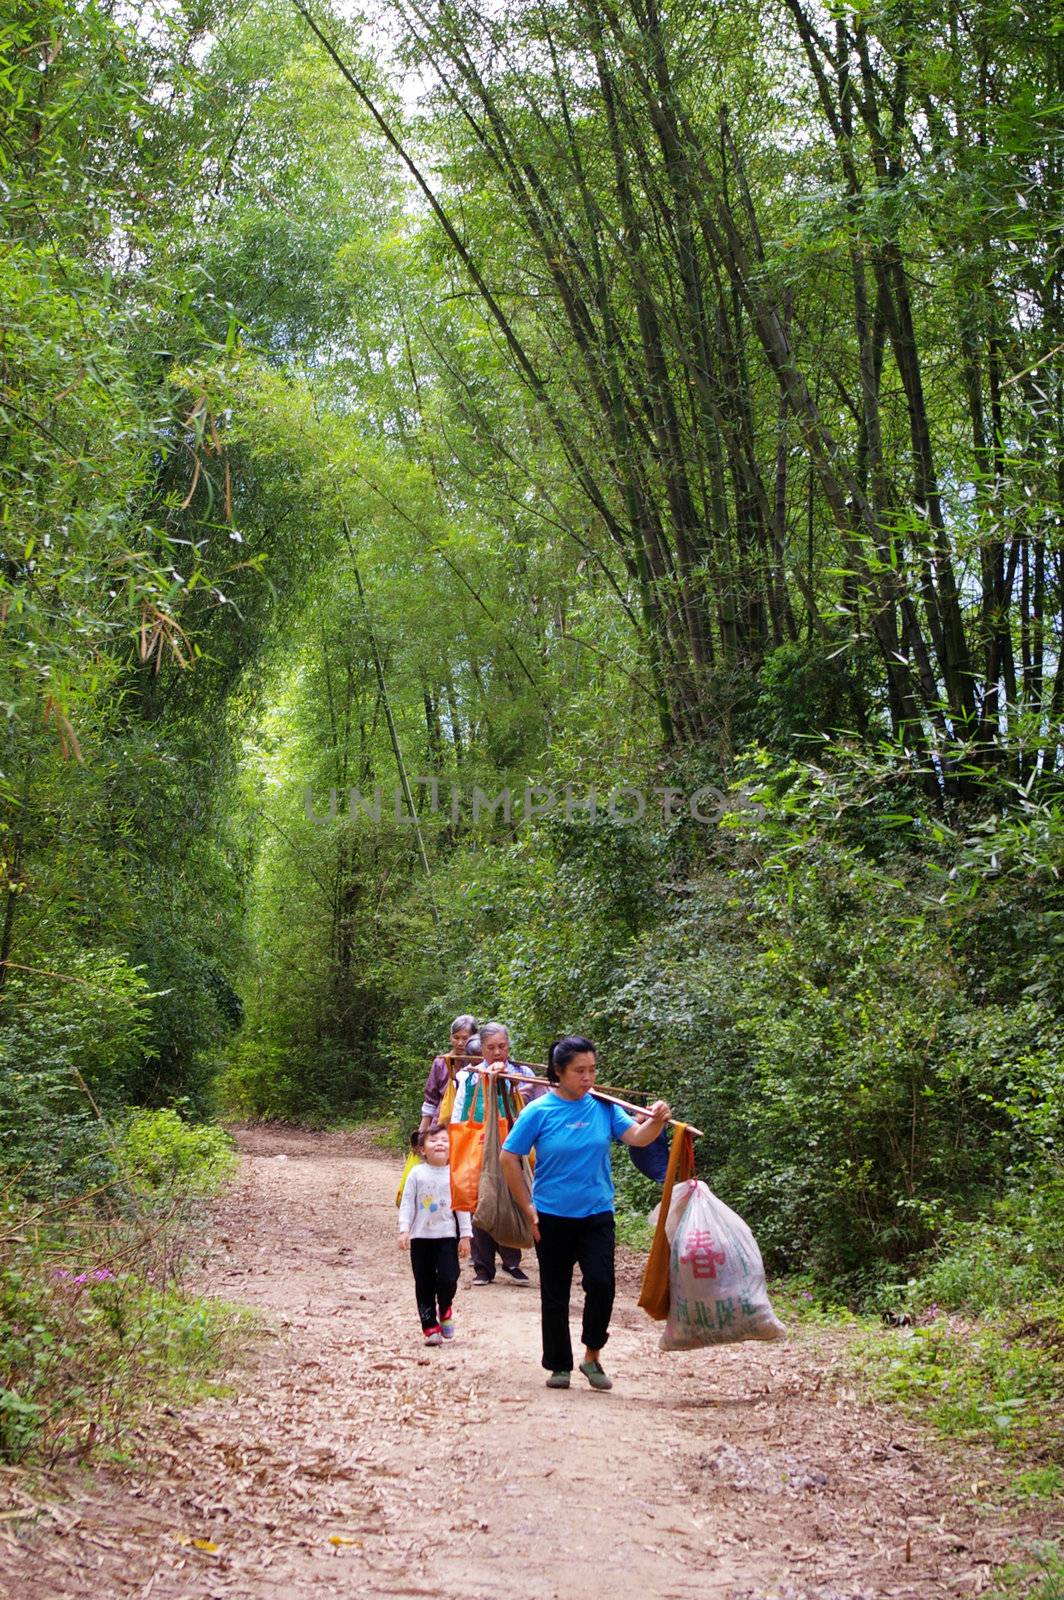 Chinese farmers walking along bamboo forest by kawing921